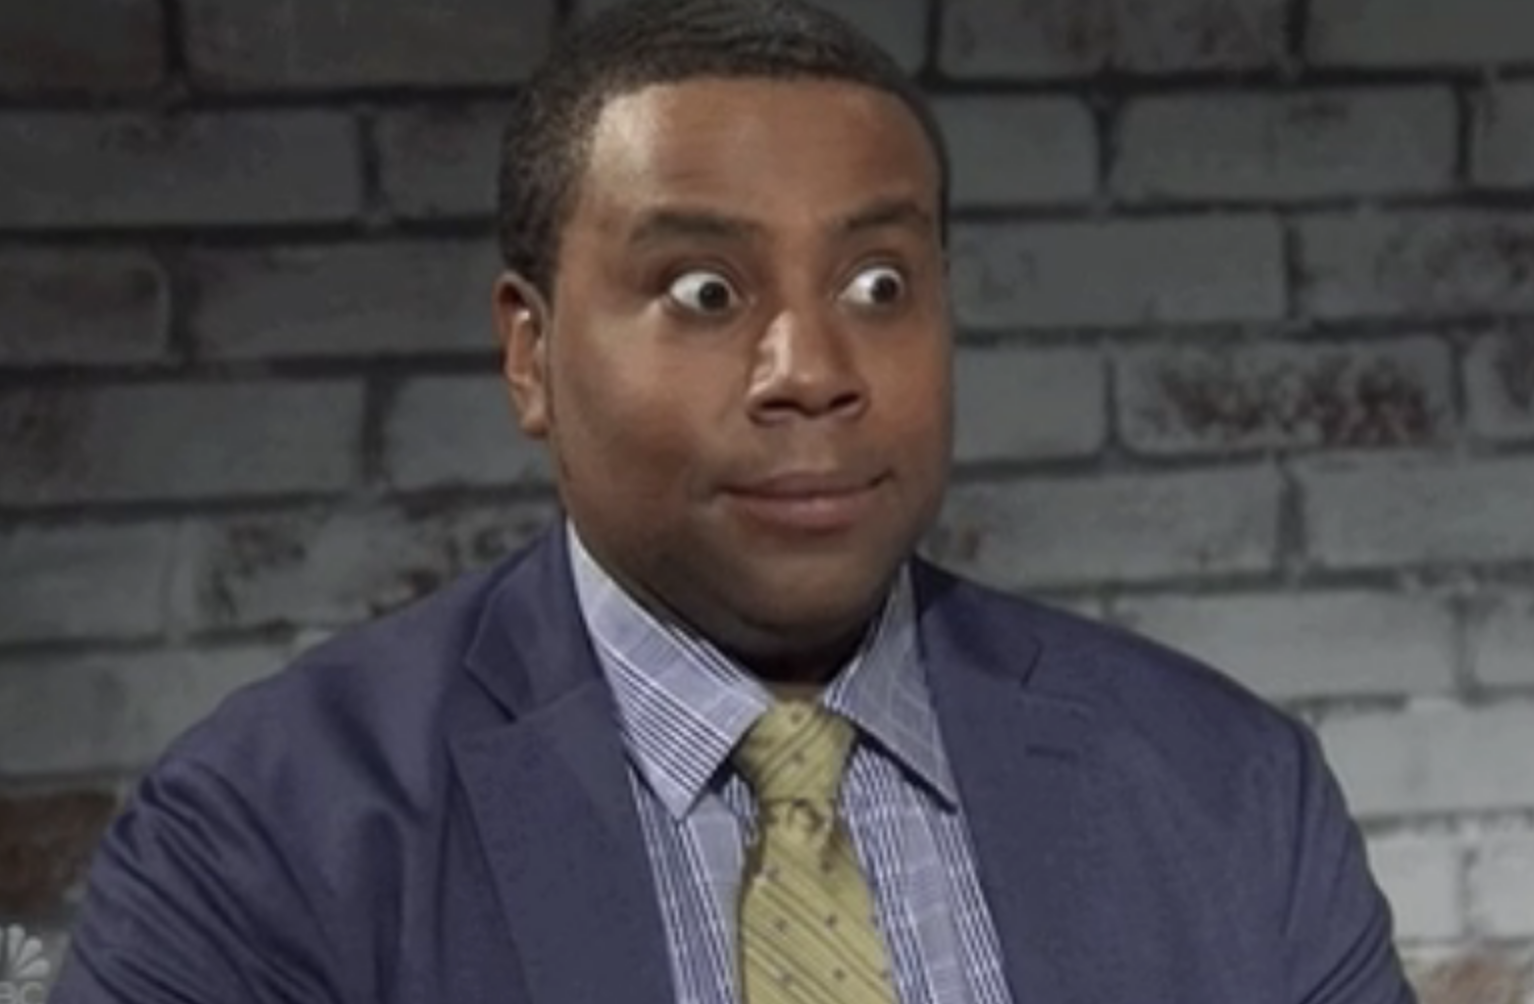 Kenan Thompson looking surprised in a suit with a striped tie